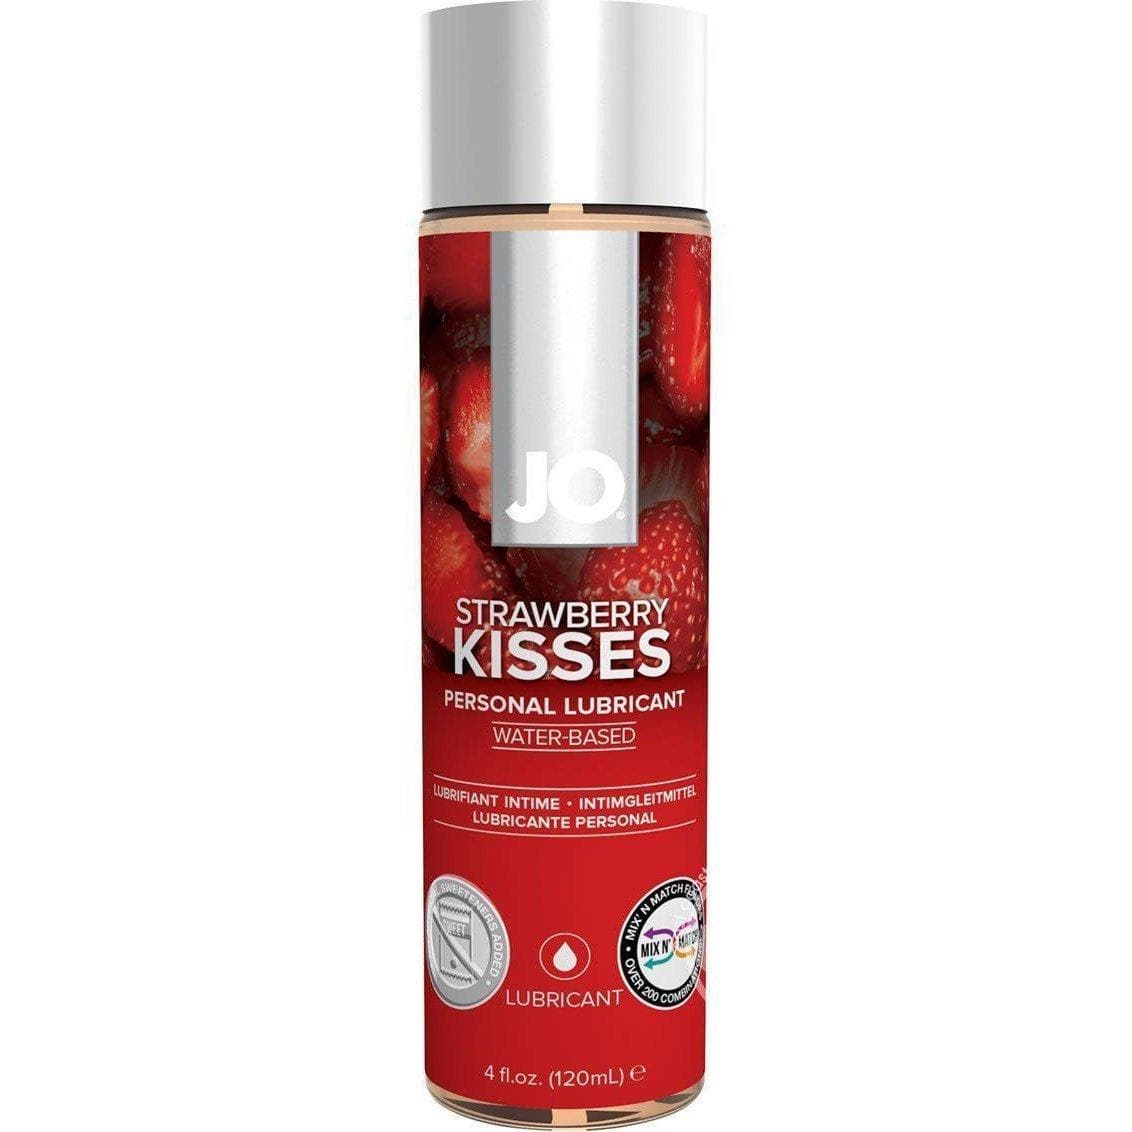 JO H2O Water Based Natural Flavor Extracts Lubricant Strawberry Kisses - Romantic Blessings